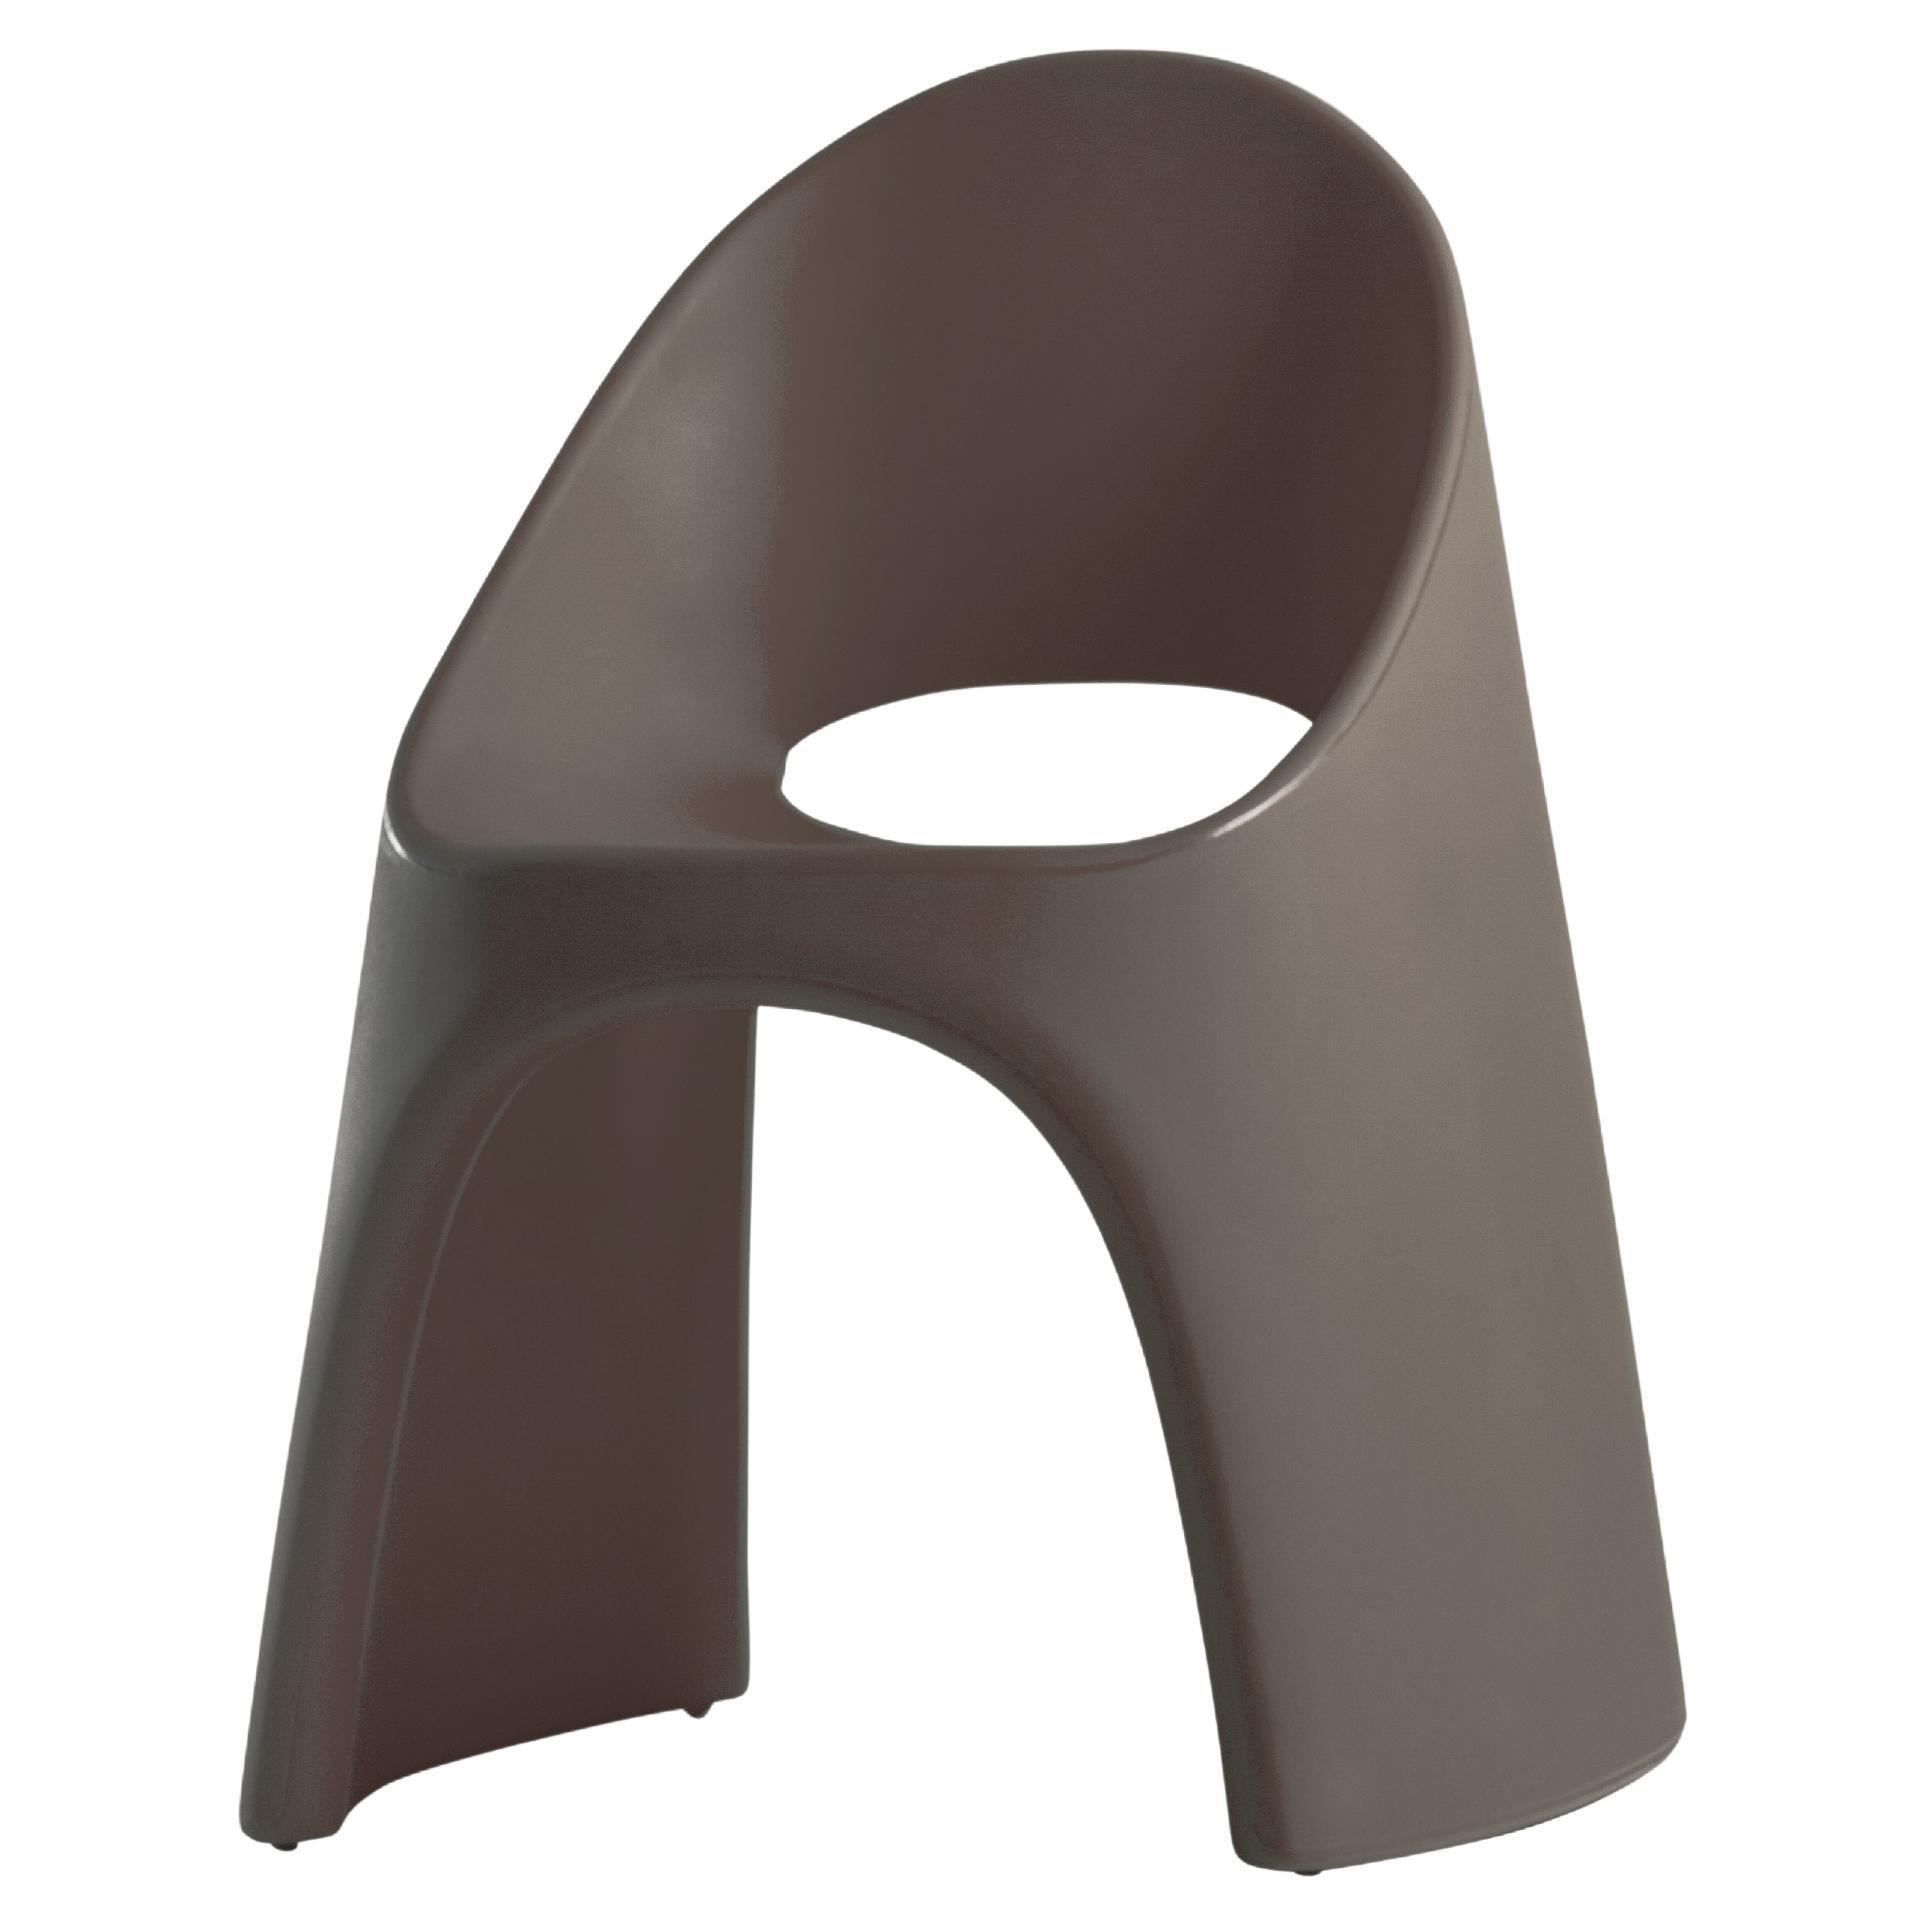 Slide Design Amélie Chair in Chocolate Brown by Italo Pertichini For Sale